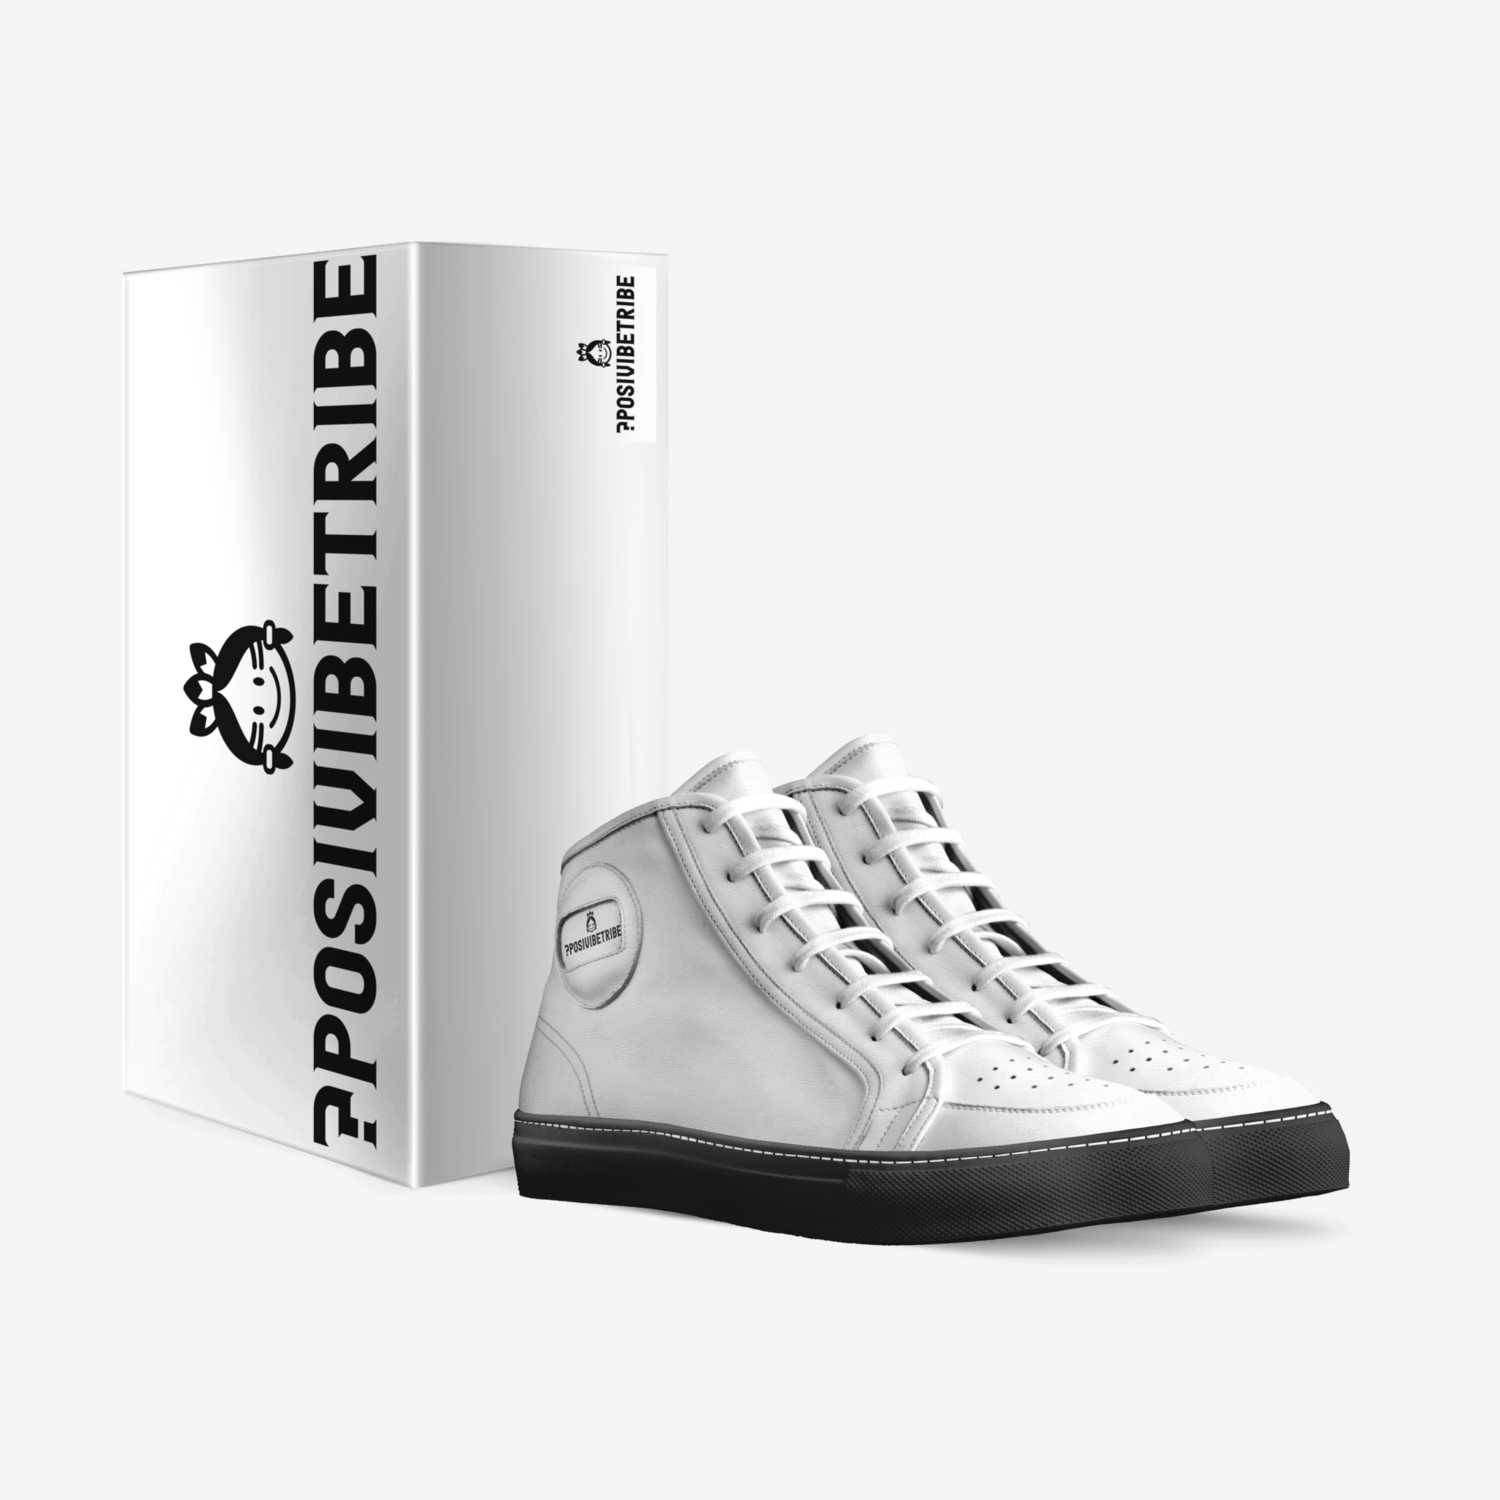 POSIVIBETRIBE 1'S custom made in Italy shoes by Ryan Worley | Box view